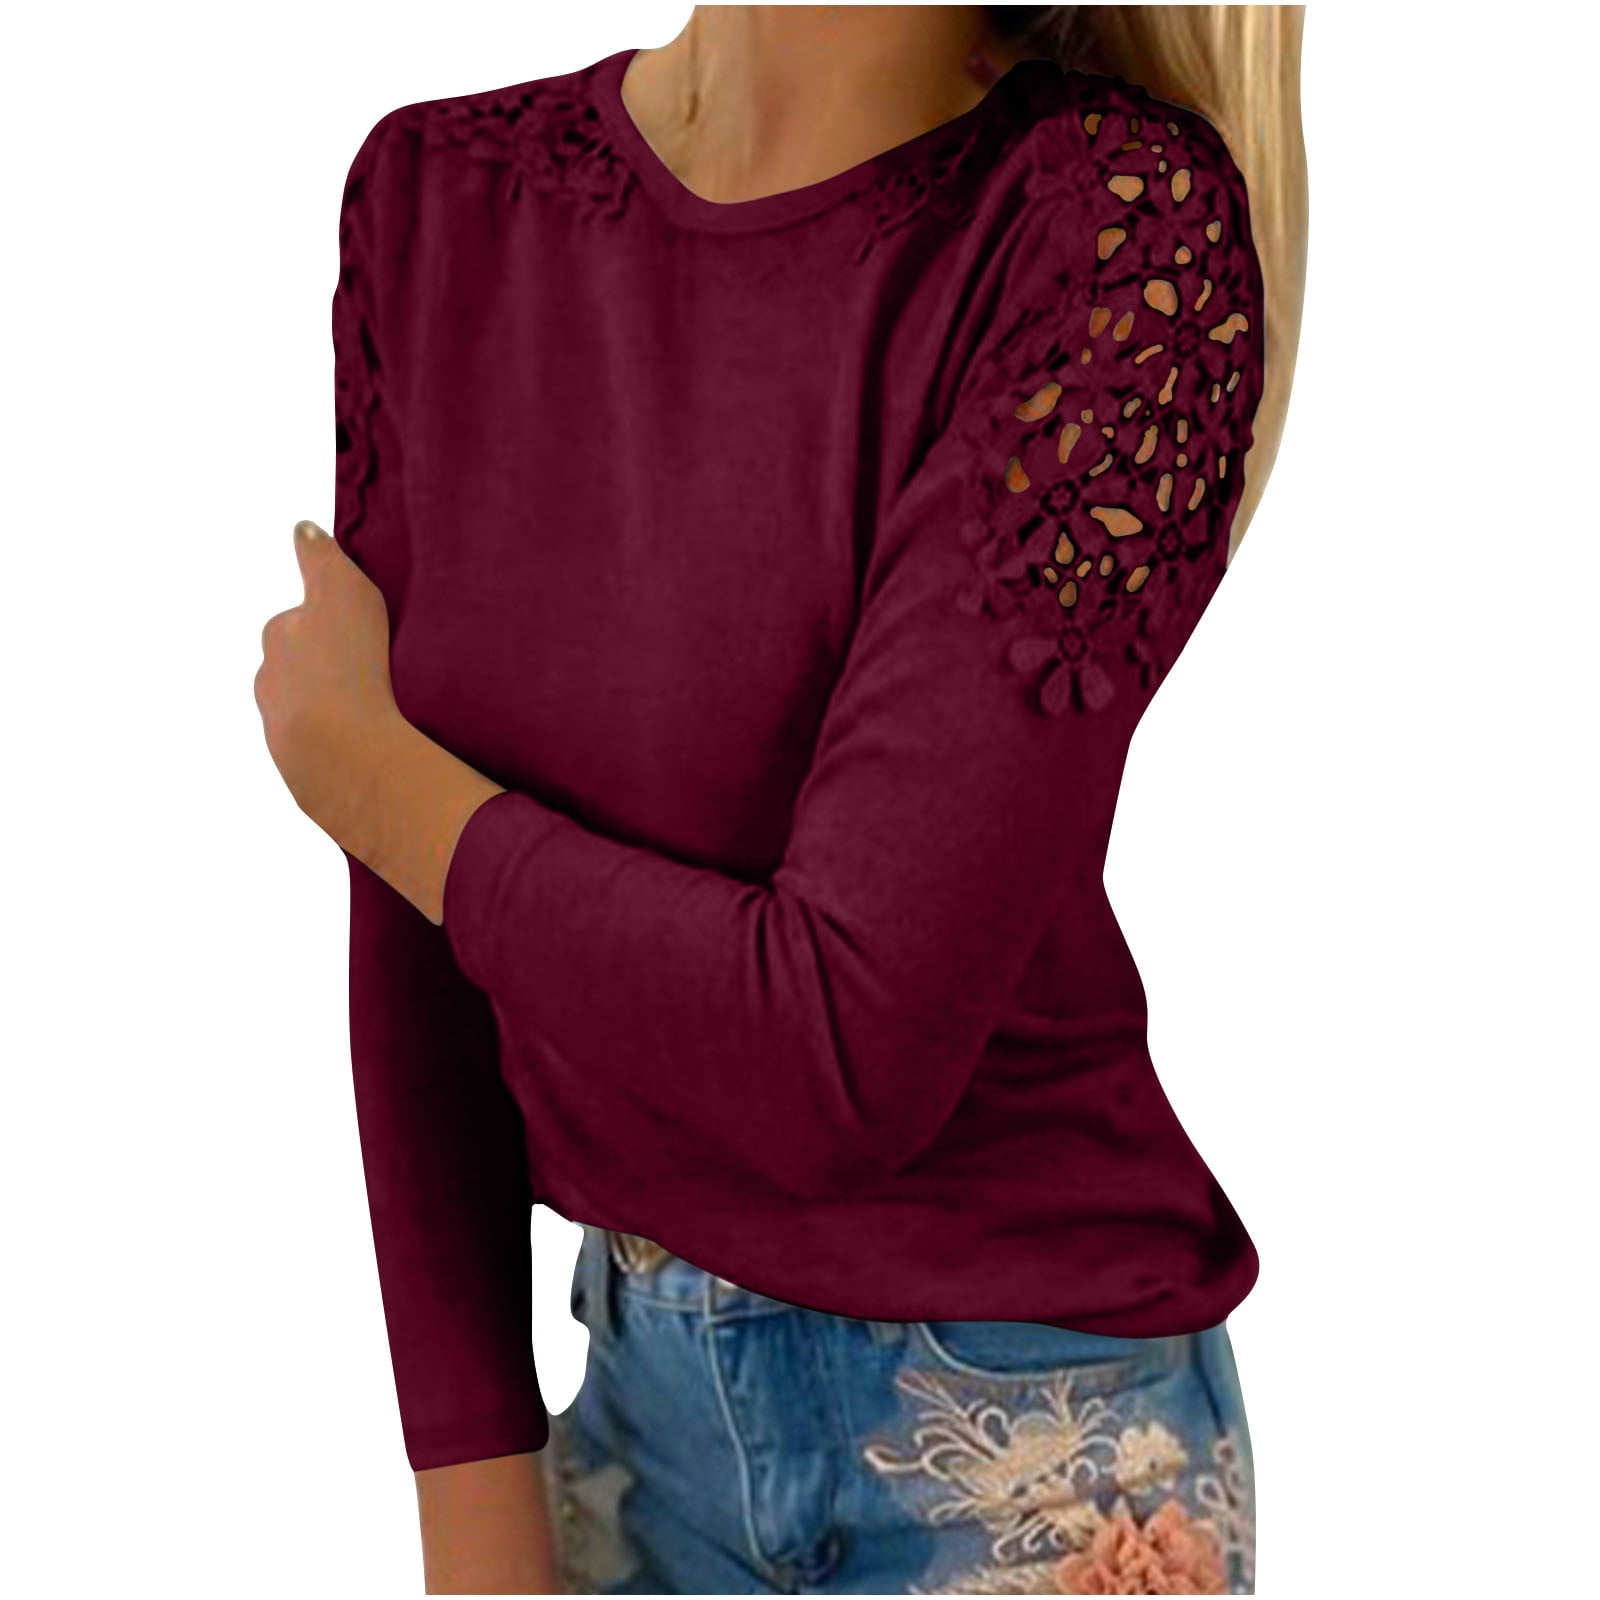 YYDGH Cute Long Sleeve Tops for Women Casual Solid Round-Neck Lace Hollow  Out Pullover Slimming Blouse T-shirt Tops(Wine,L)